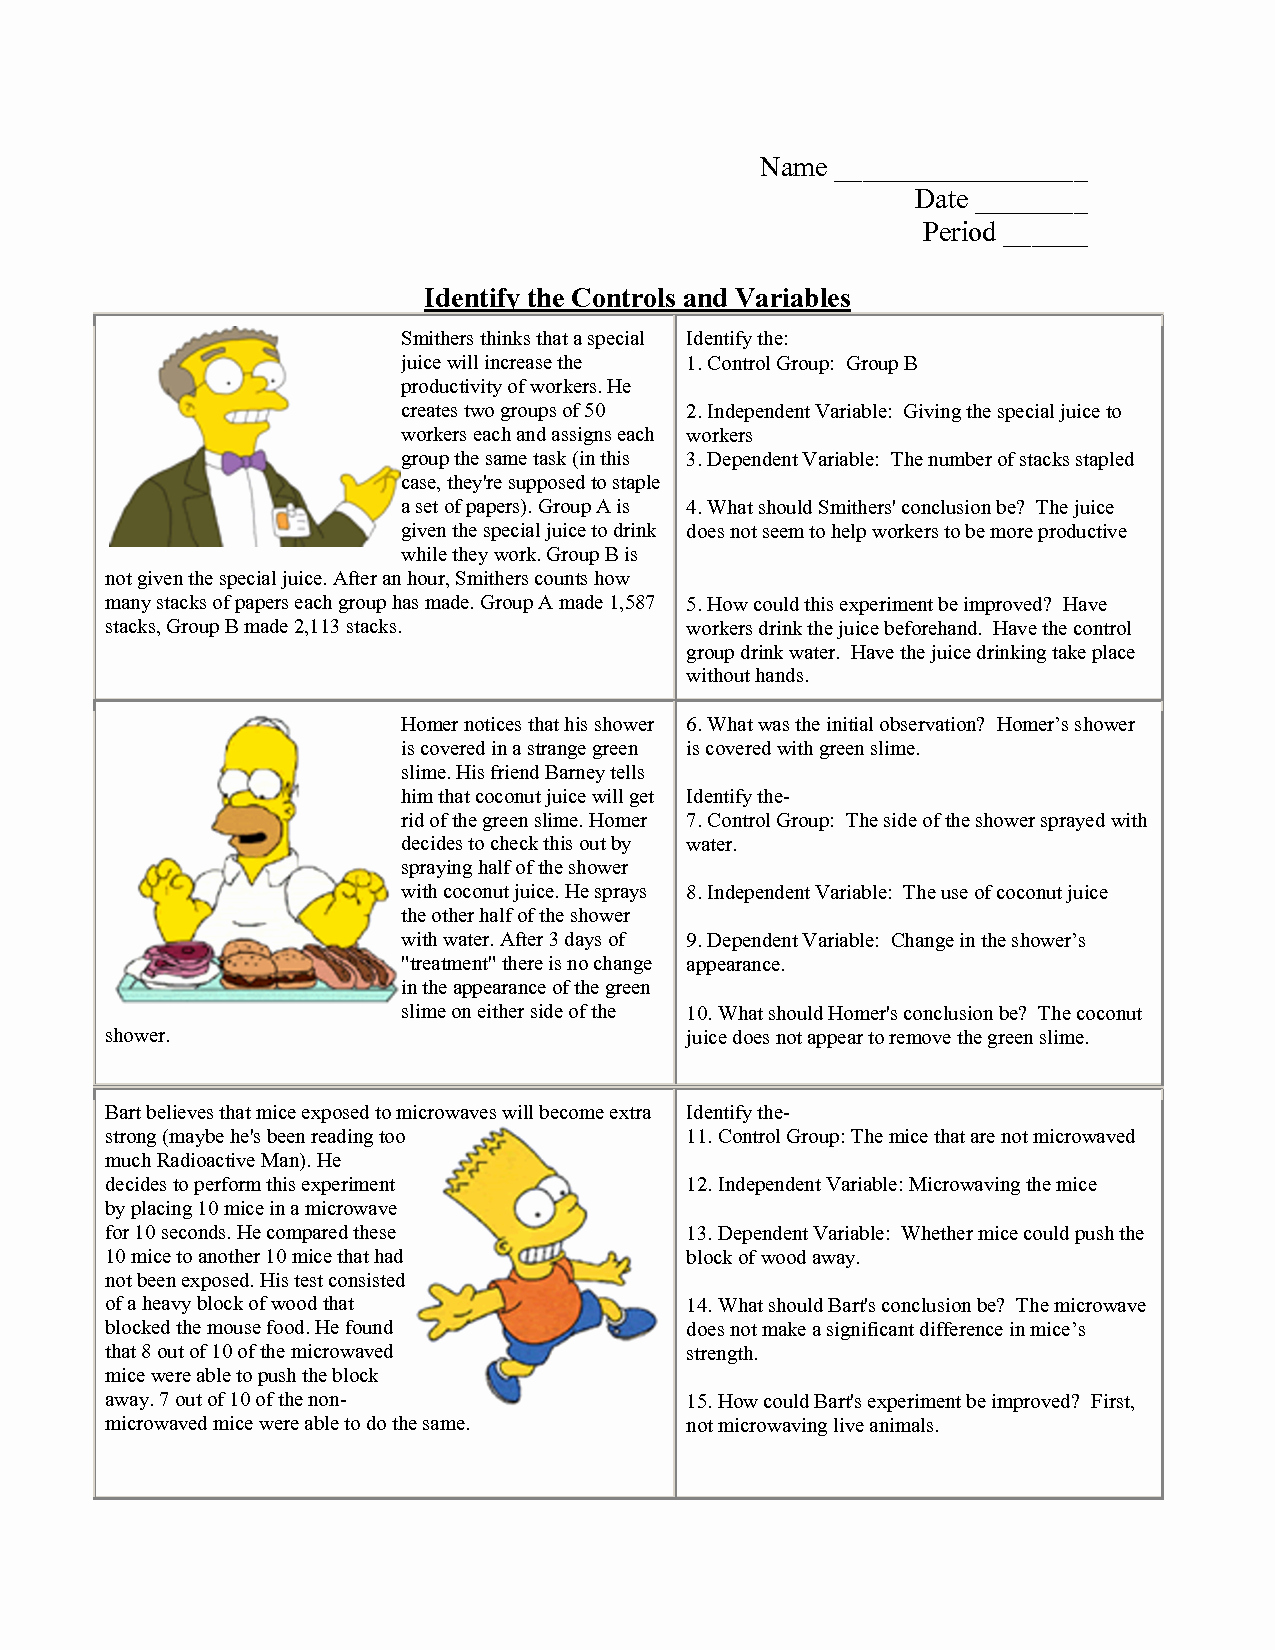 Simpsons Variables Worksheet Answers Beautiful Identifying Variables Worksheet Answers